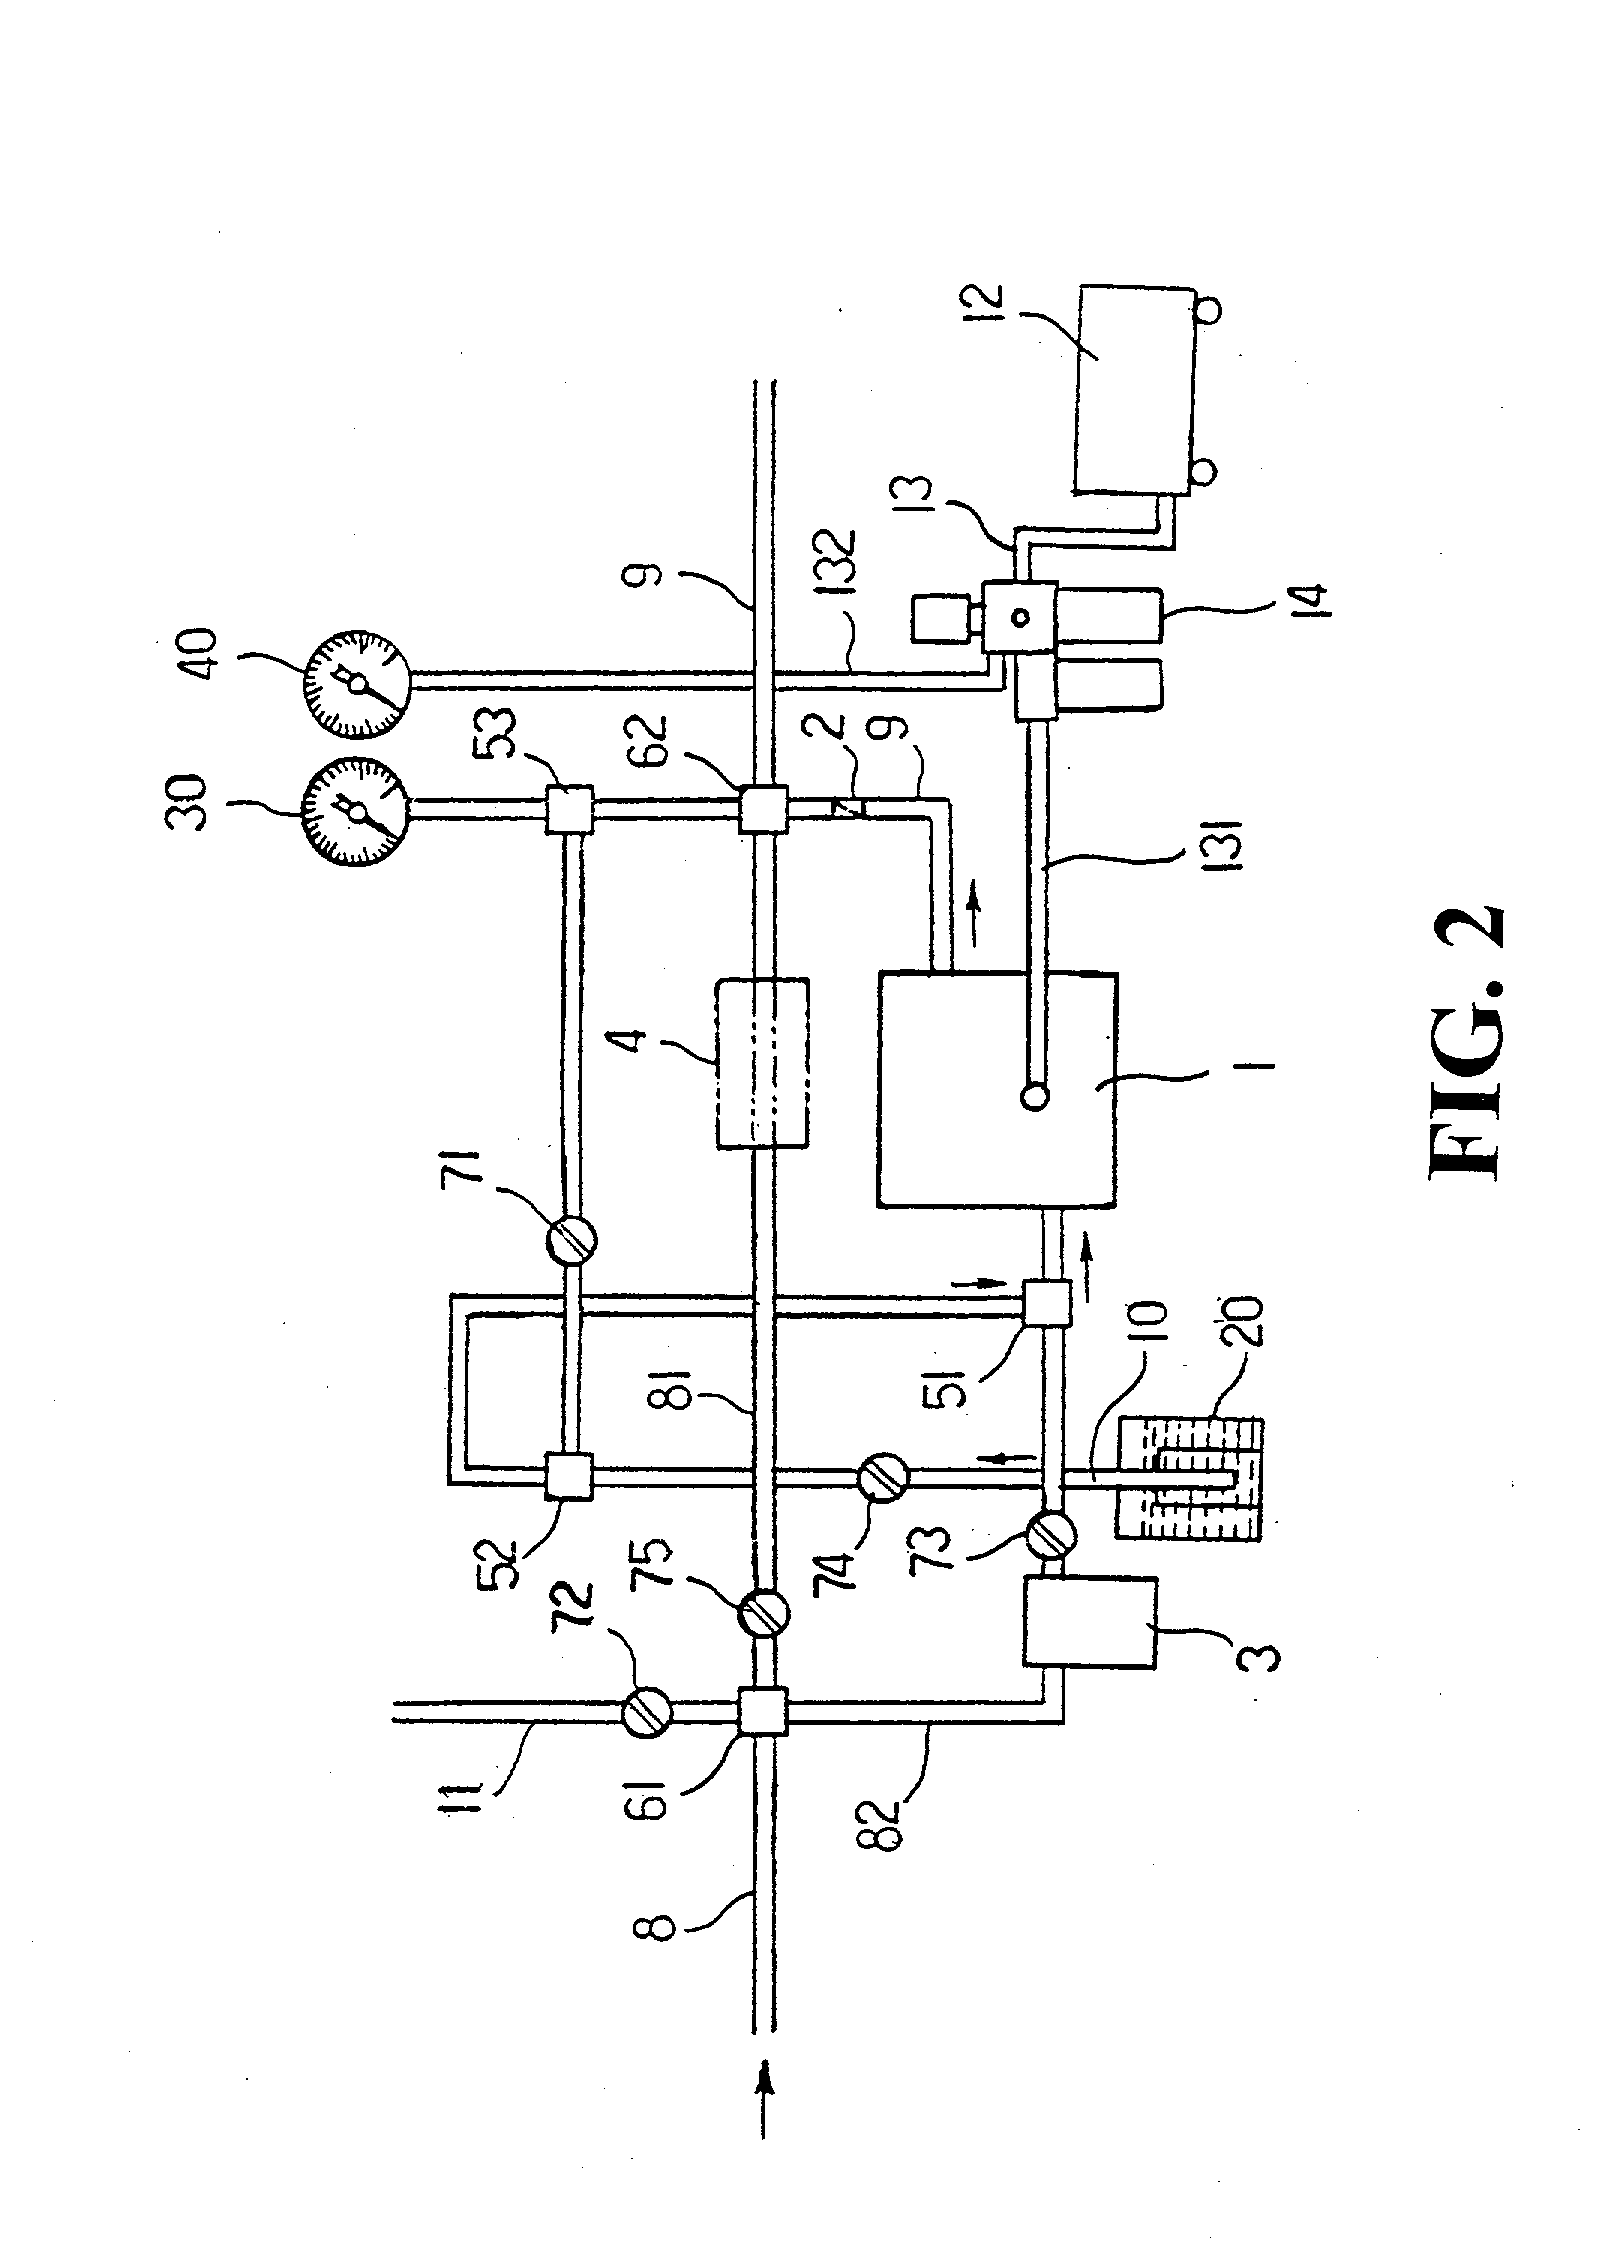 Structure of a vehicle maintenance washing apparatus